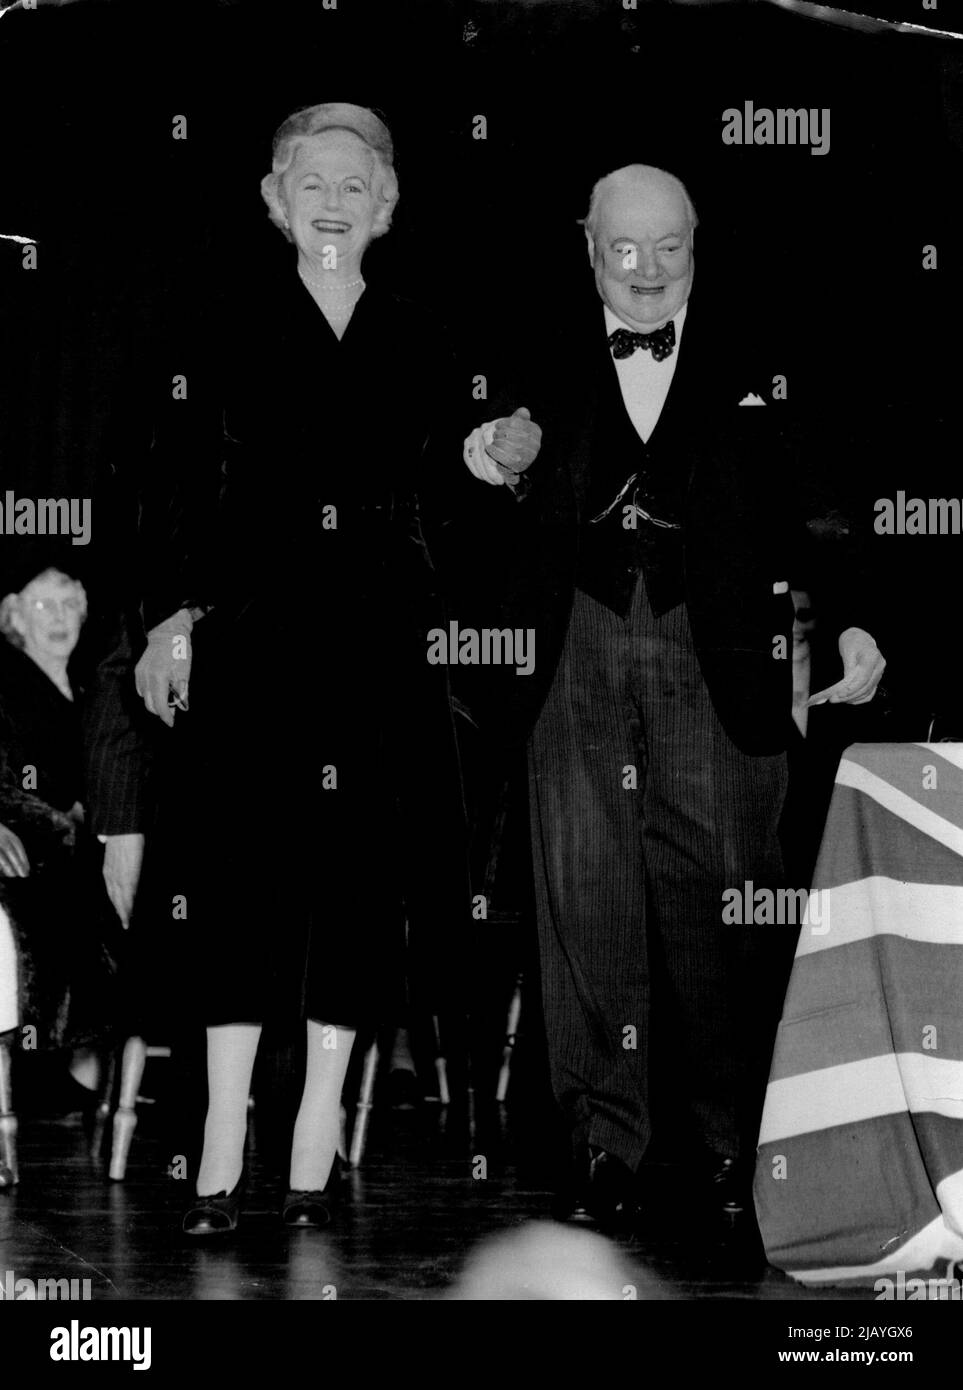 Sir Winston Gives A Come-And-Look Lead: Sir Winston Churchill takes his wife by the wrist and smilingly leads her to a portrait of Lady Churchill which was presented to the Prime Minister this evening (Tuesday) at a meeting of his constituents in the Girls County High School, Woodford, Essex. The portrait was presented to Sir Winston to mark his 80th birthday, on November 30. November 23, 1954. (Photo by Reuterphoto). Stock Photo